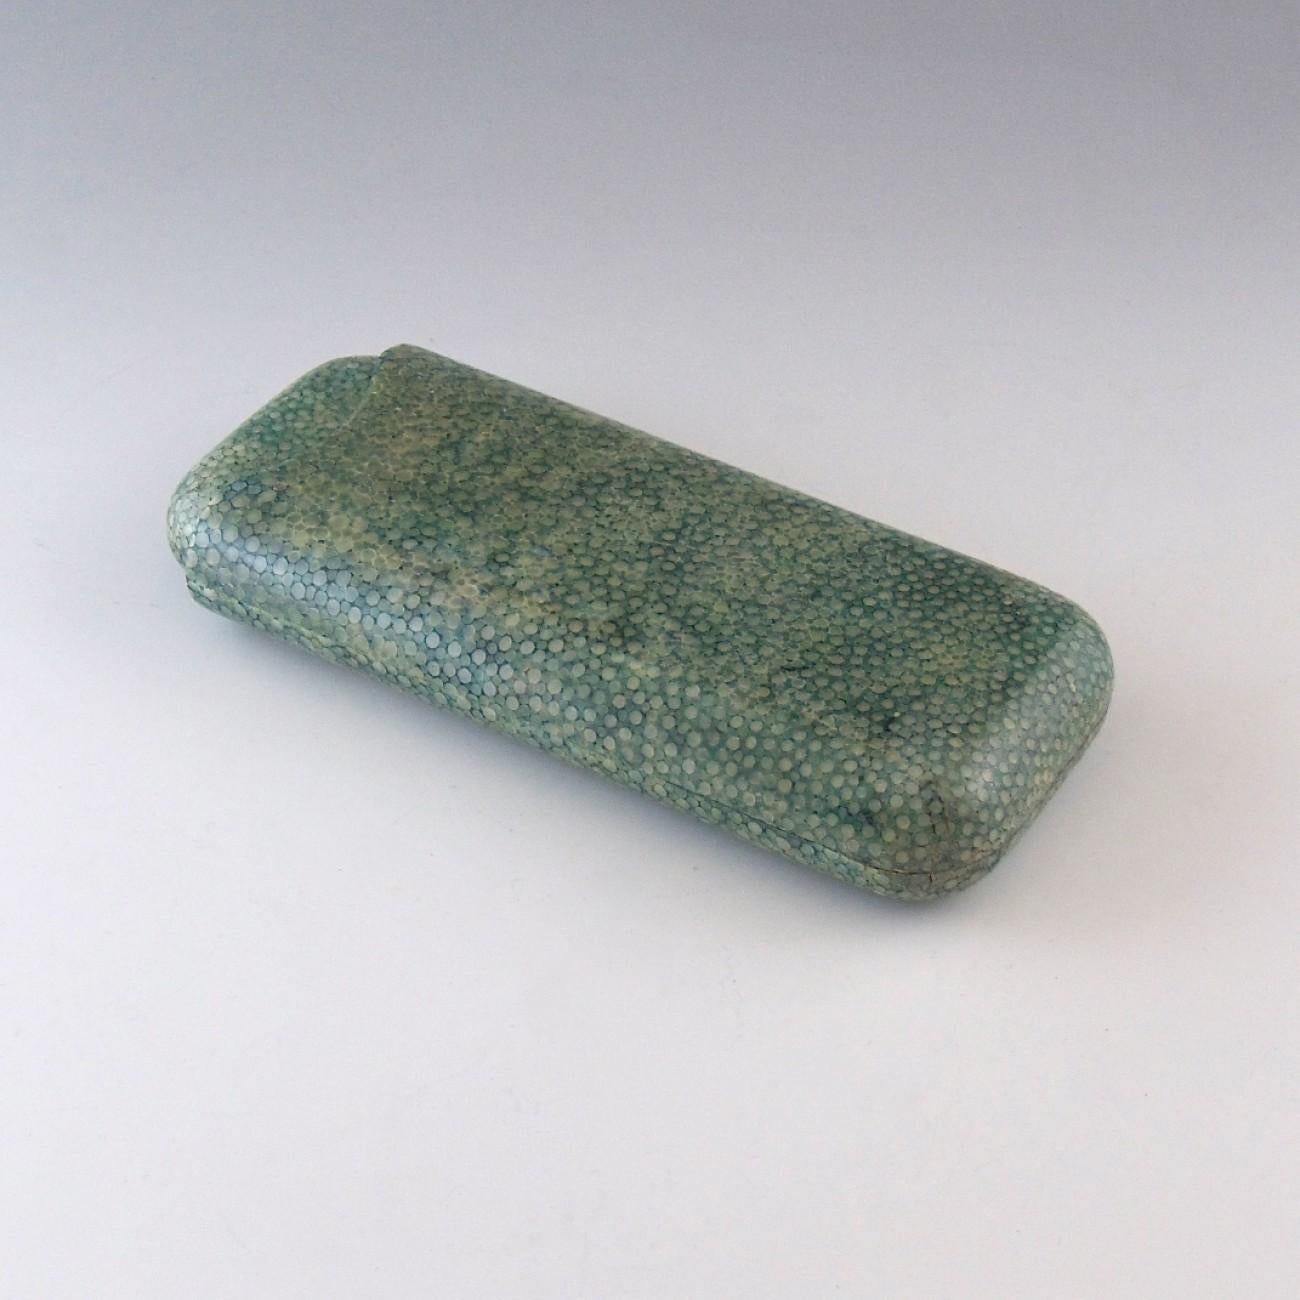 A magnificent shagreen cigar case, circa 1920. Expands for differing lengths of cigar.

Dimensions (when fully closed): 15.5 cm/5 inches (length) x 6.5 cm/2? inches (width) x 2.5 cm/1 inches (thick).
Will take up to four cigars with maximum diameter